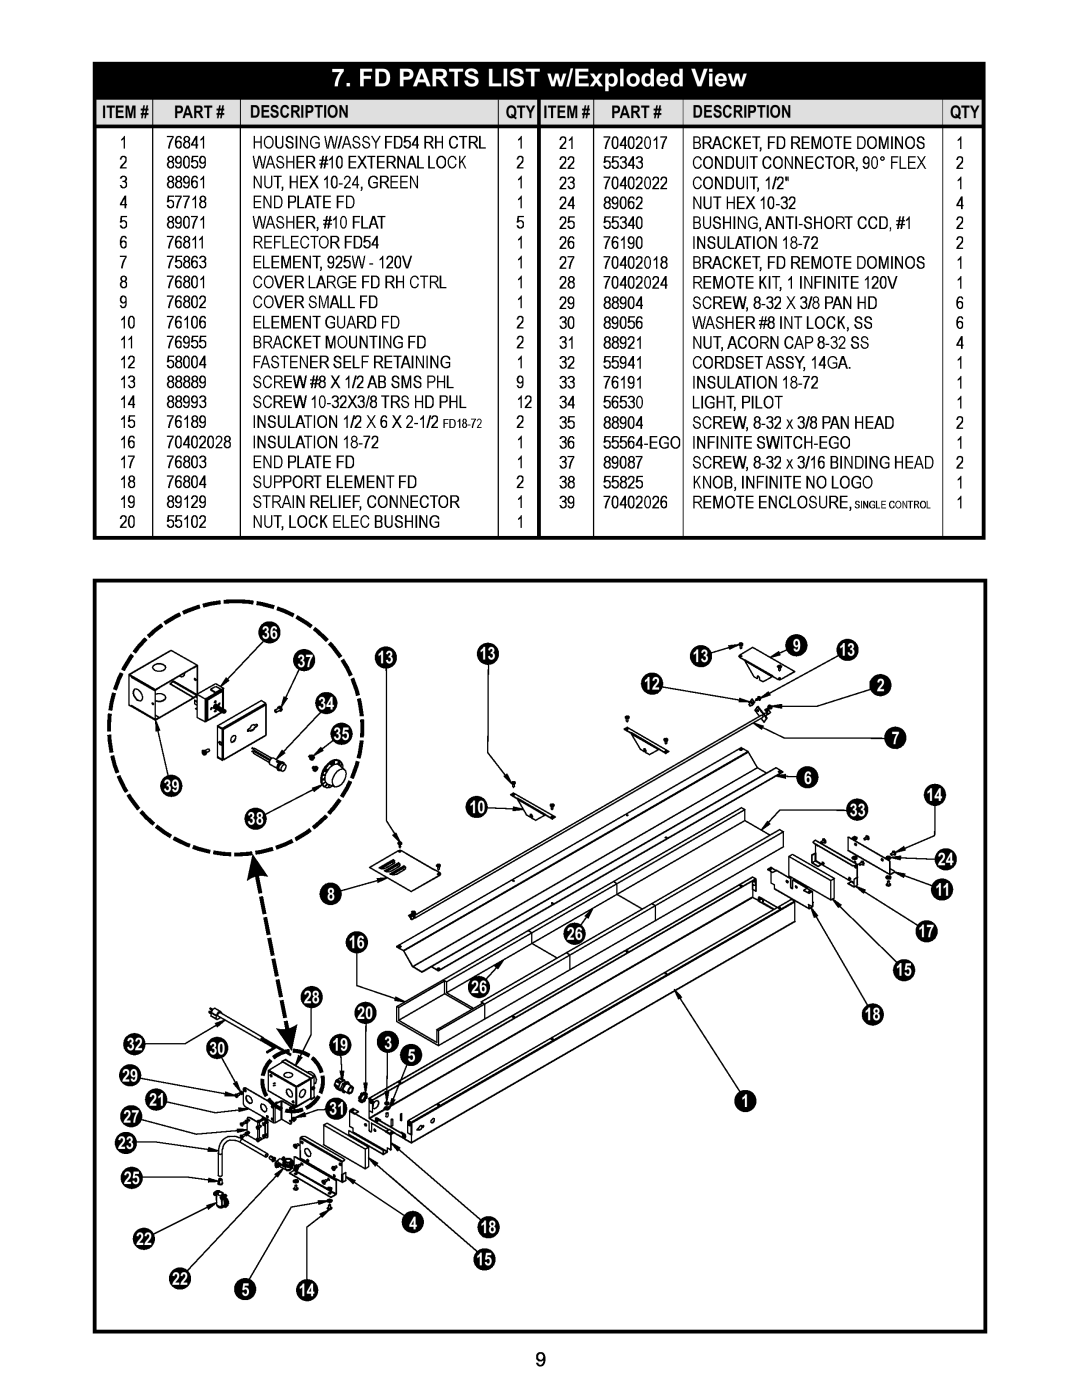 APW installation instructions FD PARTS LIST w/Exploded View, Part #, Iption, Qty Item # 